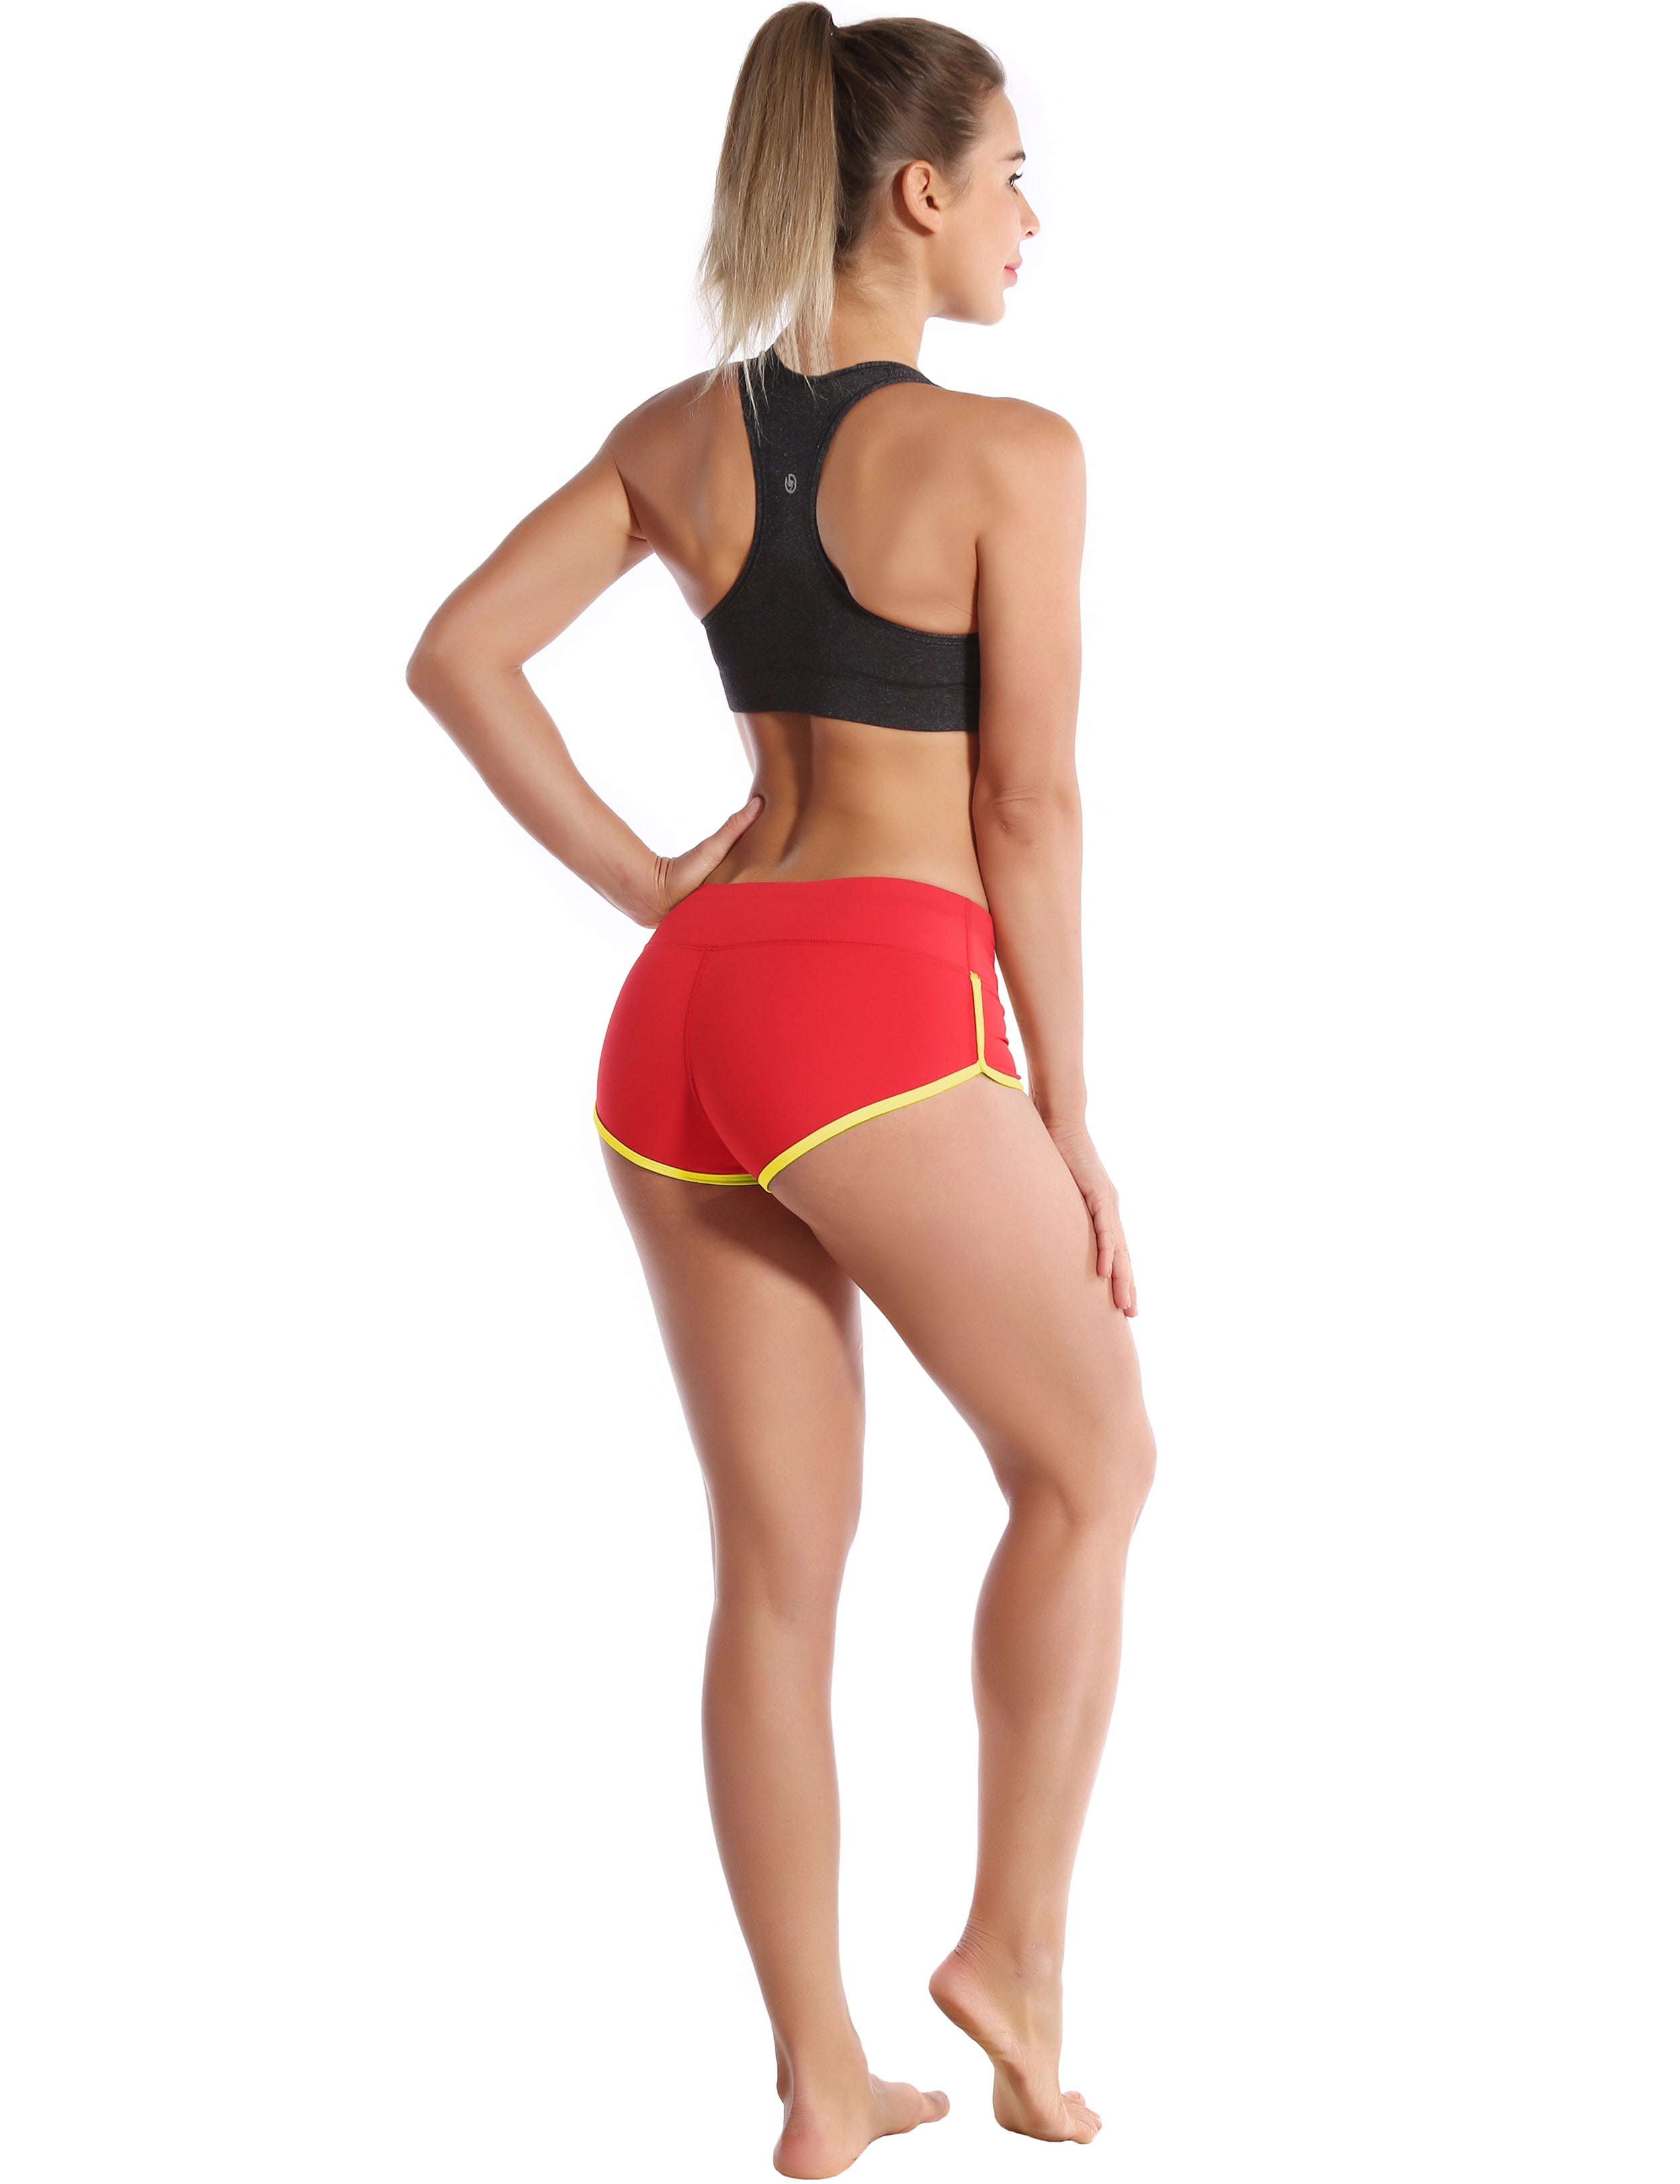 Sexy Booty Golf Shorts scarlet_fluorescentyellow Sleek, soft, smooth and totally comfortable: our newest sexy style is here. Softest-ever fabric High elasticity High density 4-way stretch Fabric doesn't attract lint easily No see-through Moisture-wicking Machine wash 75%Nylon/25%Spandex